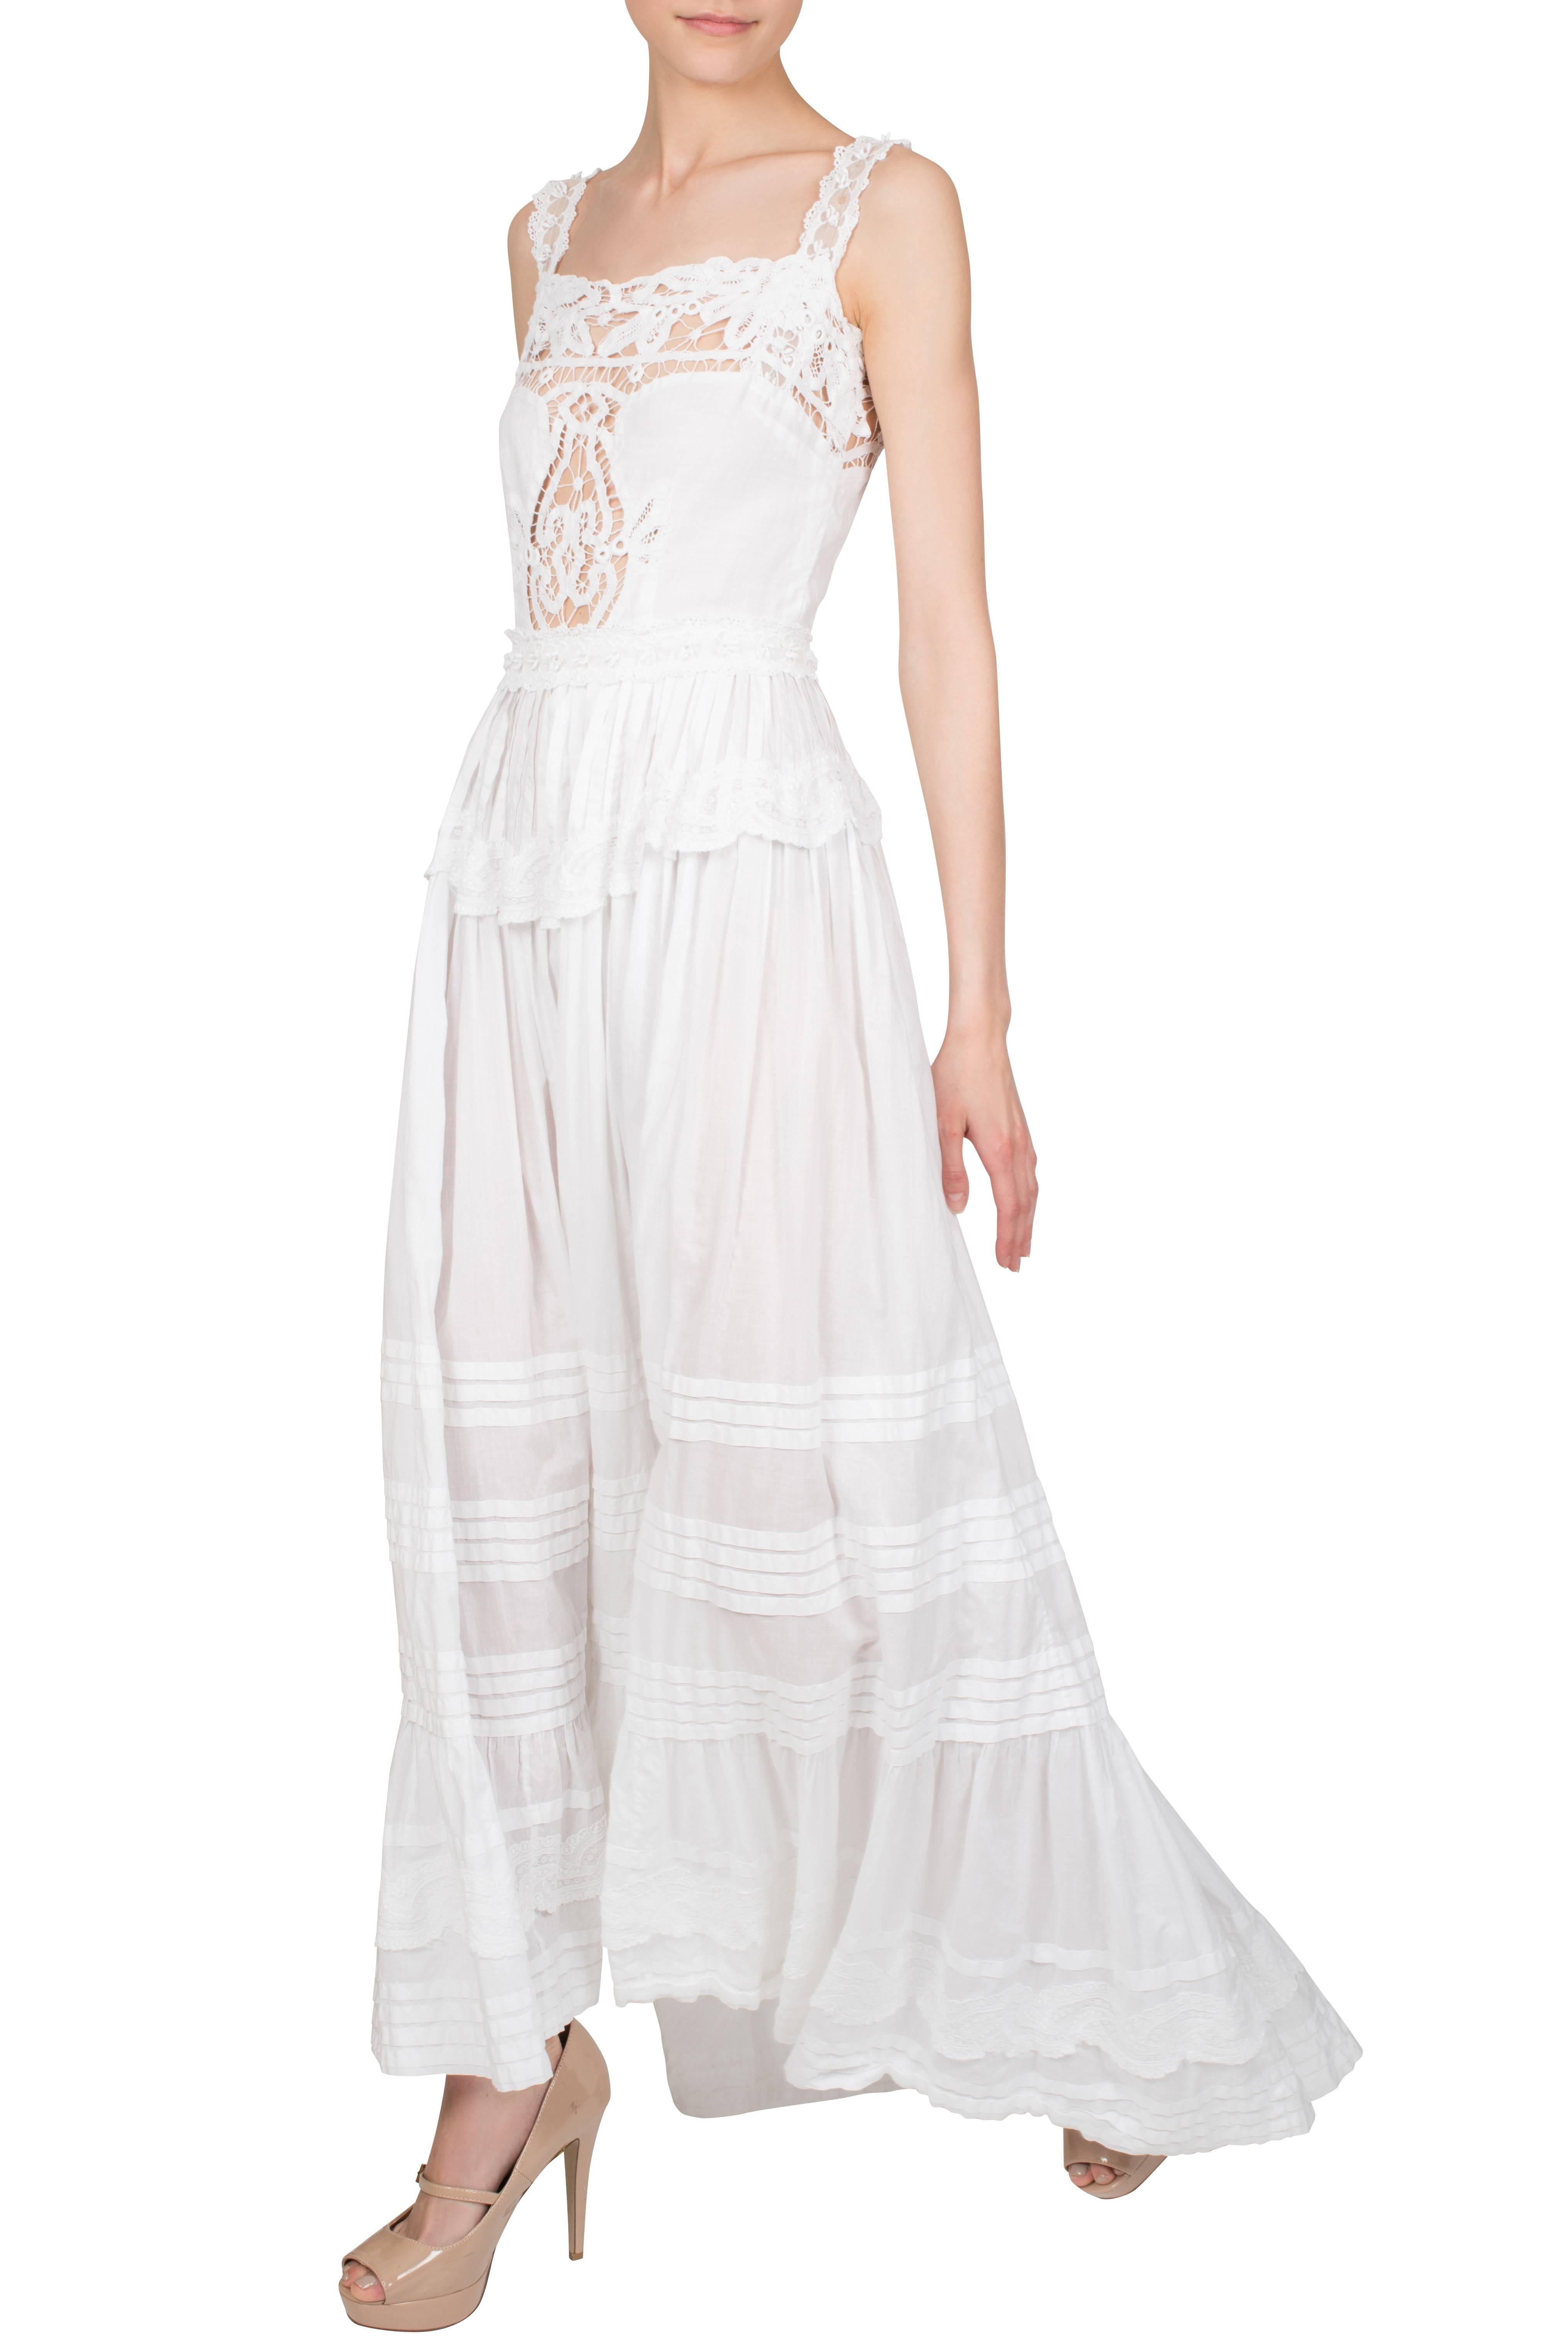 A one-of-a-kind 1970's white cotton maxi dress with lace detailing designed by Hollywood costume designer Theodora van Runkle for Miranda Quarry during her marriage to Peter Sellers. The Victorian style, sleeveless dress features white lace and